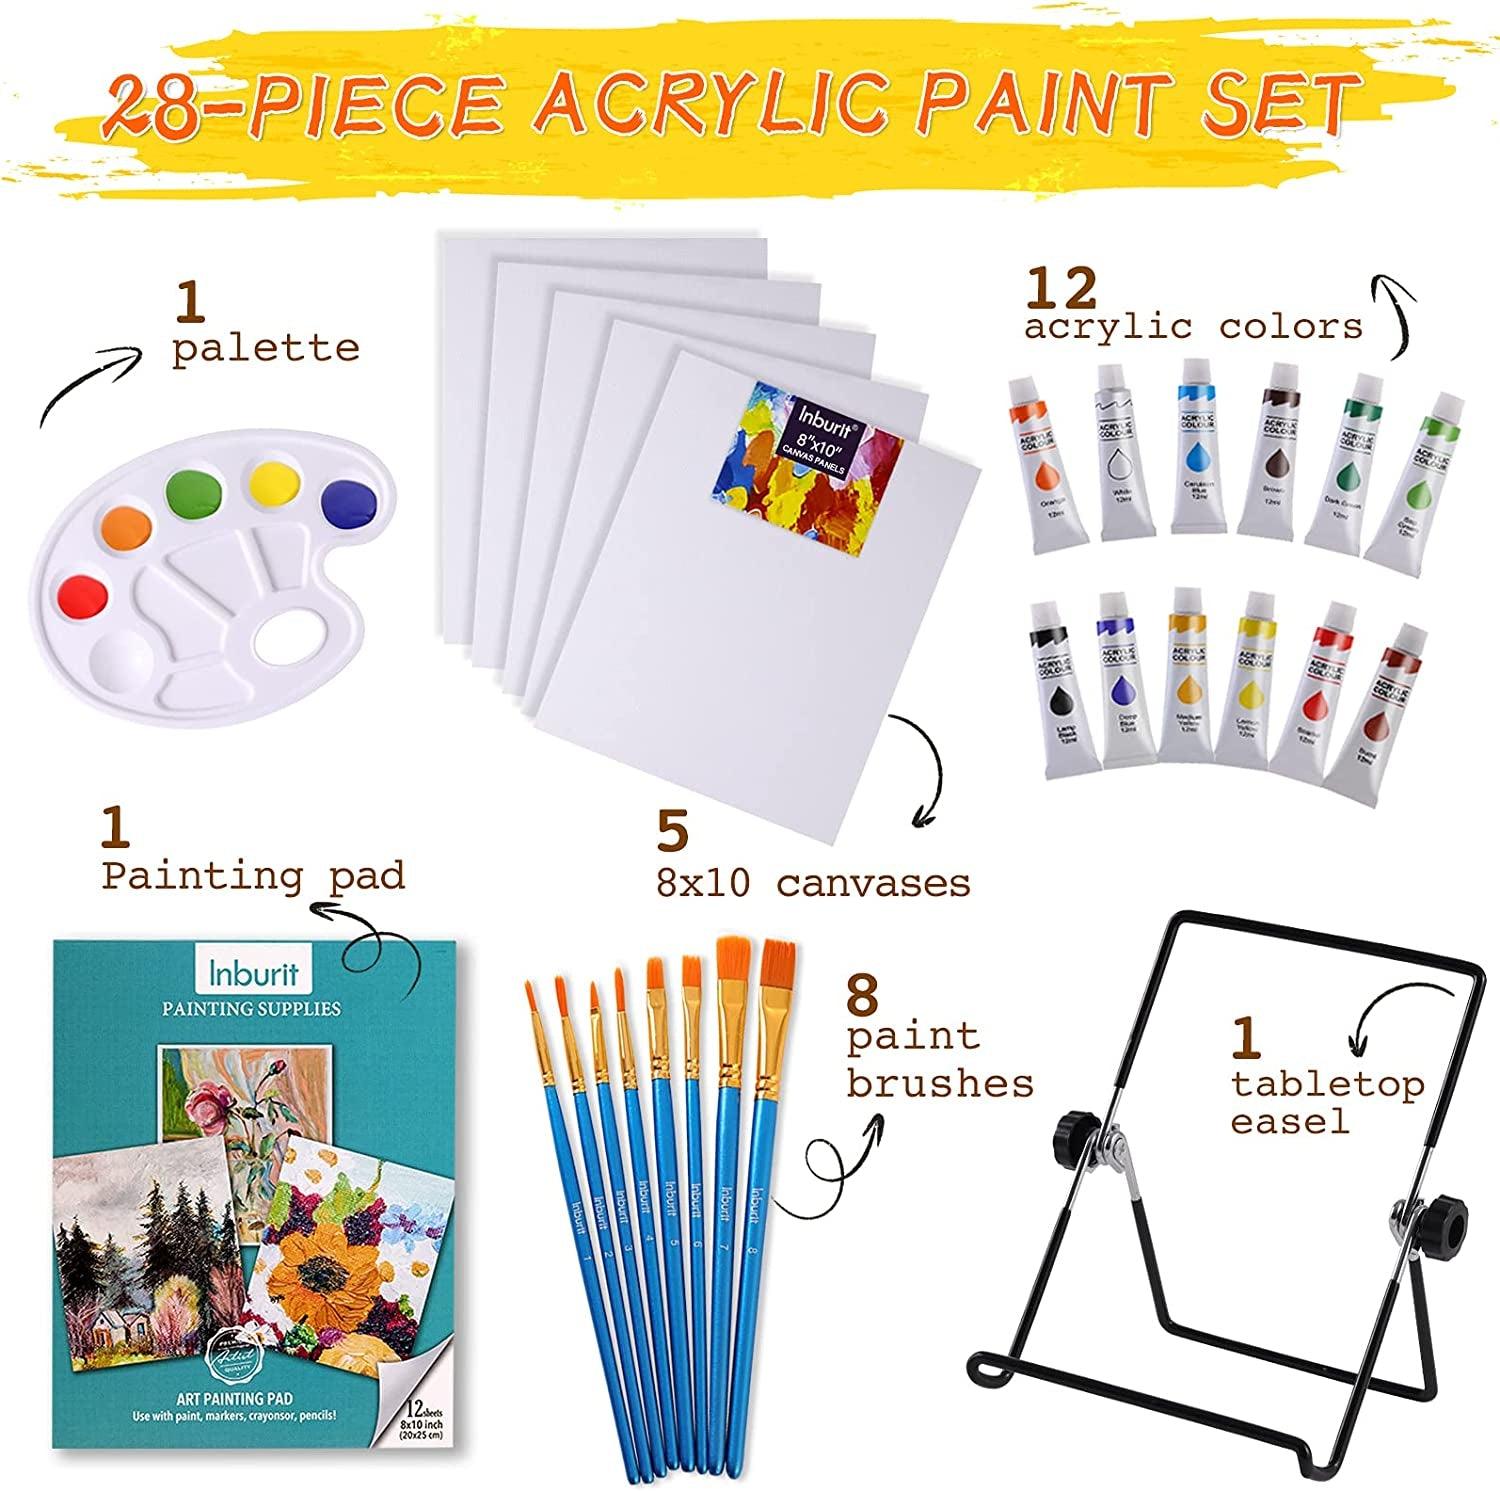 Art Paint Set for Kids, Painting Supplies Kit with 5 Canvas Panels, 8 Brushes, 12 Acrylic Paints, Multi-Function Table Easel - WoodArtSupply